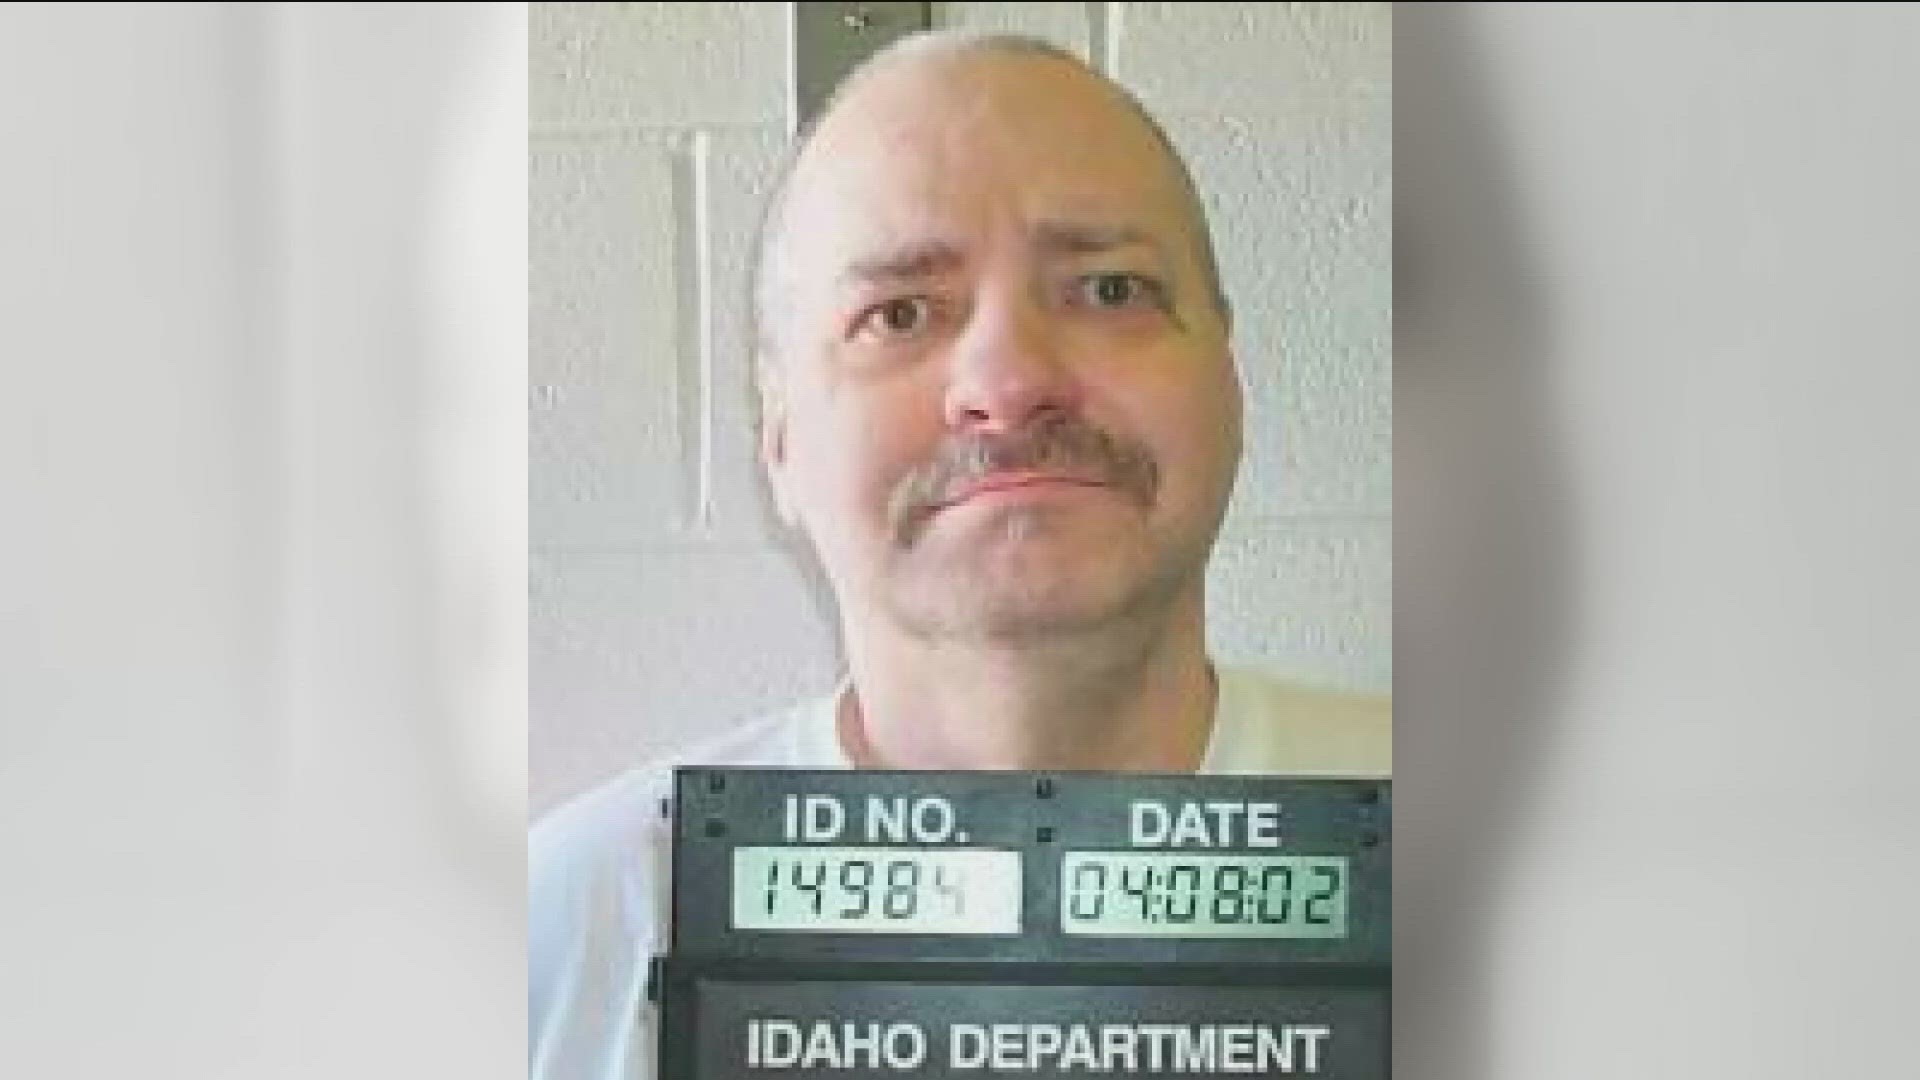 The lawyers for Thomas Creech, Idaho's longest-serving death row inmate filed a new federal complaint in attempt to delay his upcoming execution.